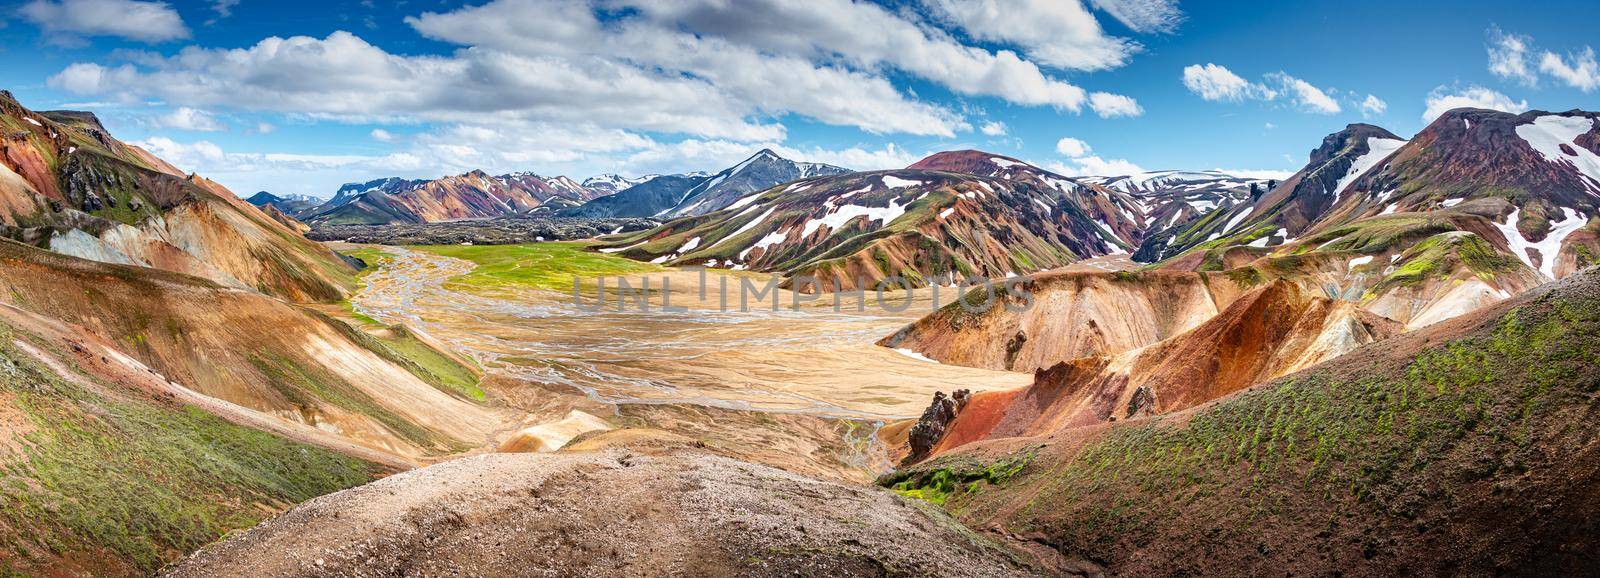 Panoramic true Icelandic landscape view of colorful rainbow volcanic Landmannalaugar mountains, volcanoes, valleys and famous Laugavegur hiking trail at blue sky, Iceland